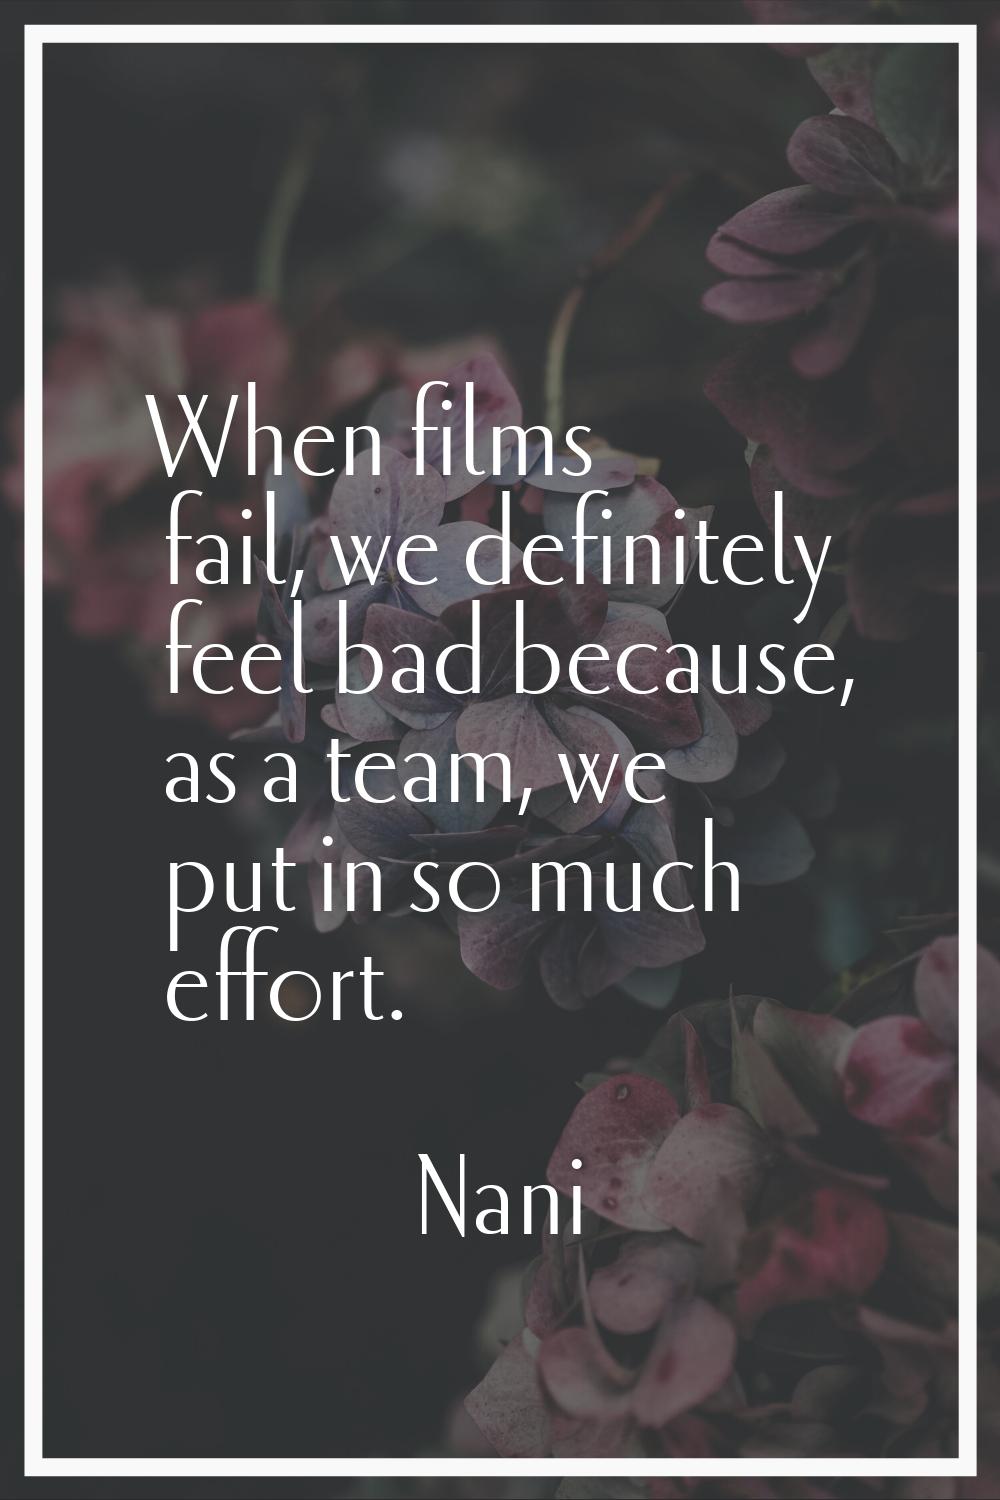 When films fail, we definitely feel bad because, as a team, we put in so much effort.